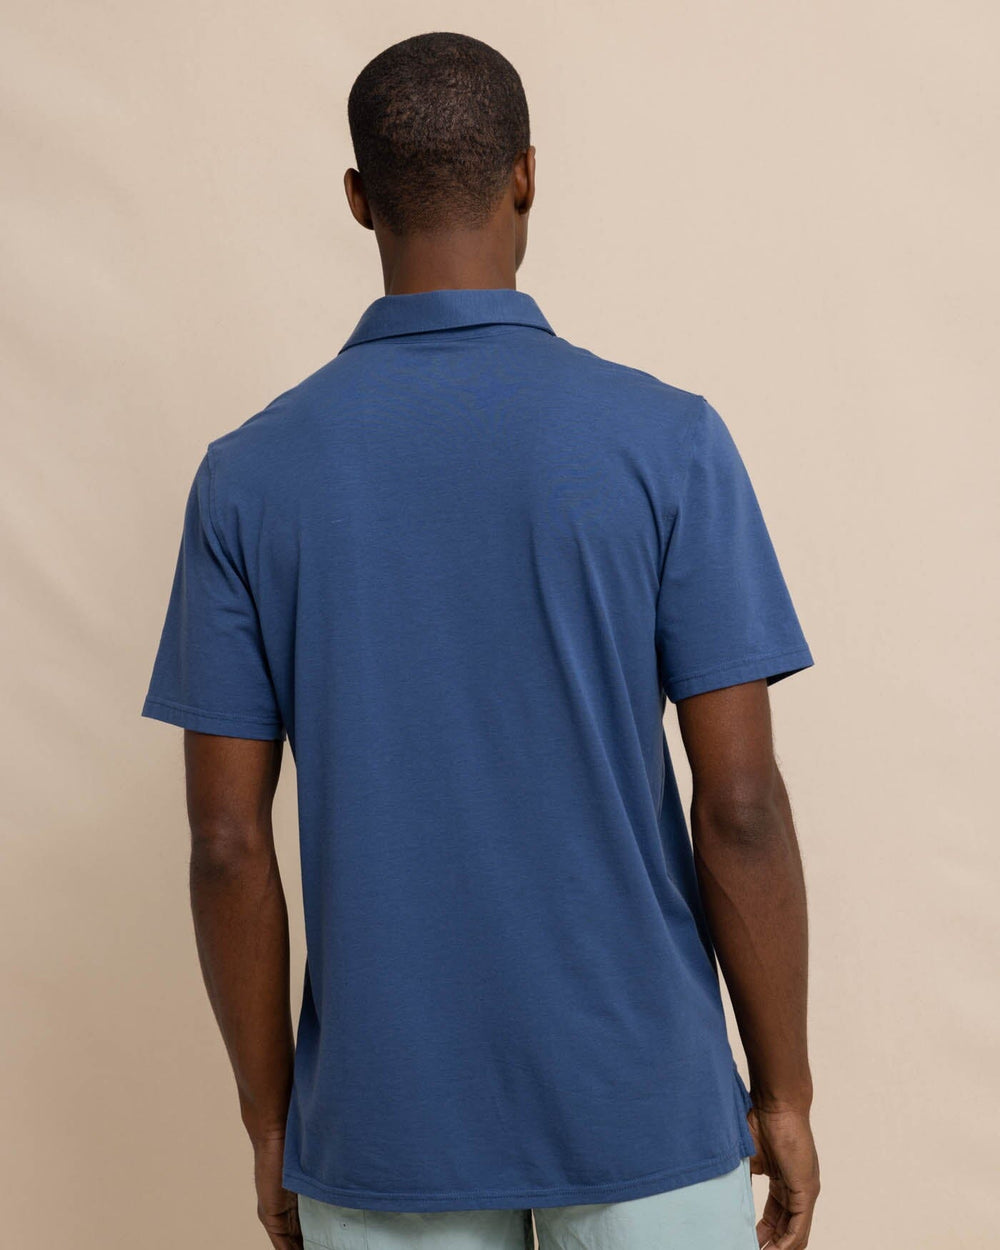 The back view of the Southern Tide The Seaport Polo by Southern Tide - Aged Denim